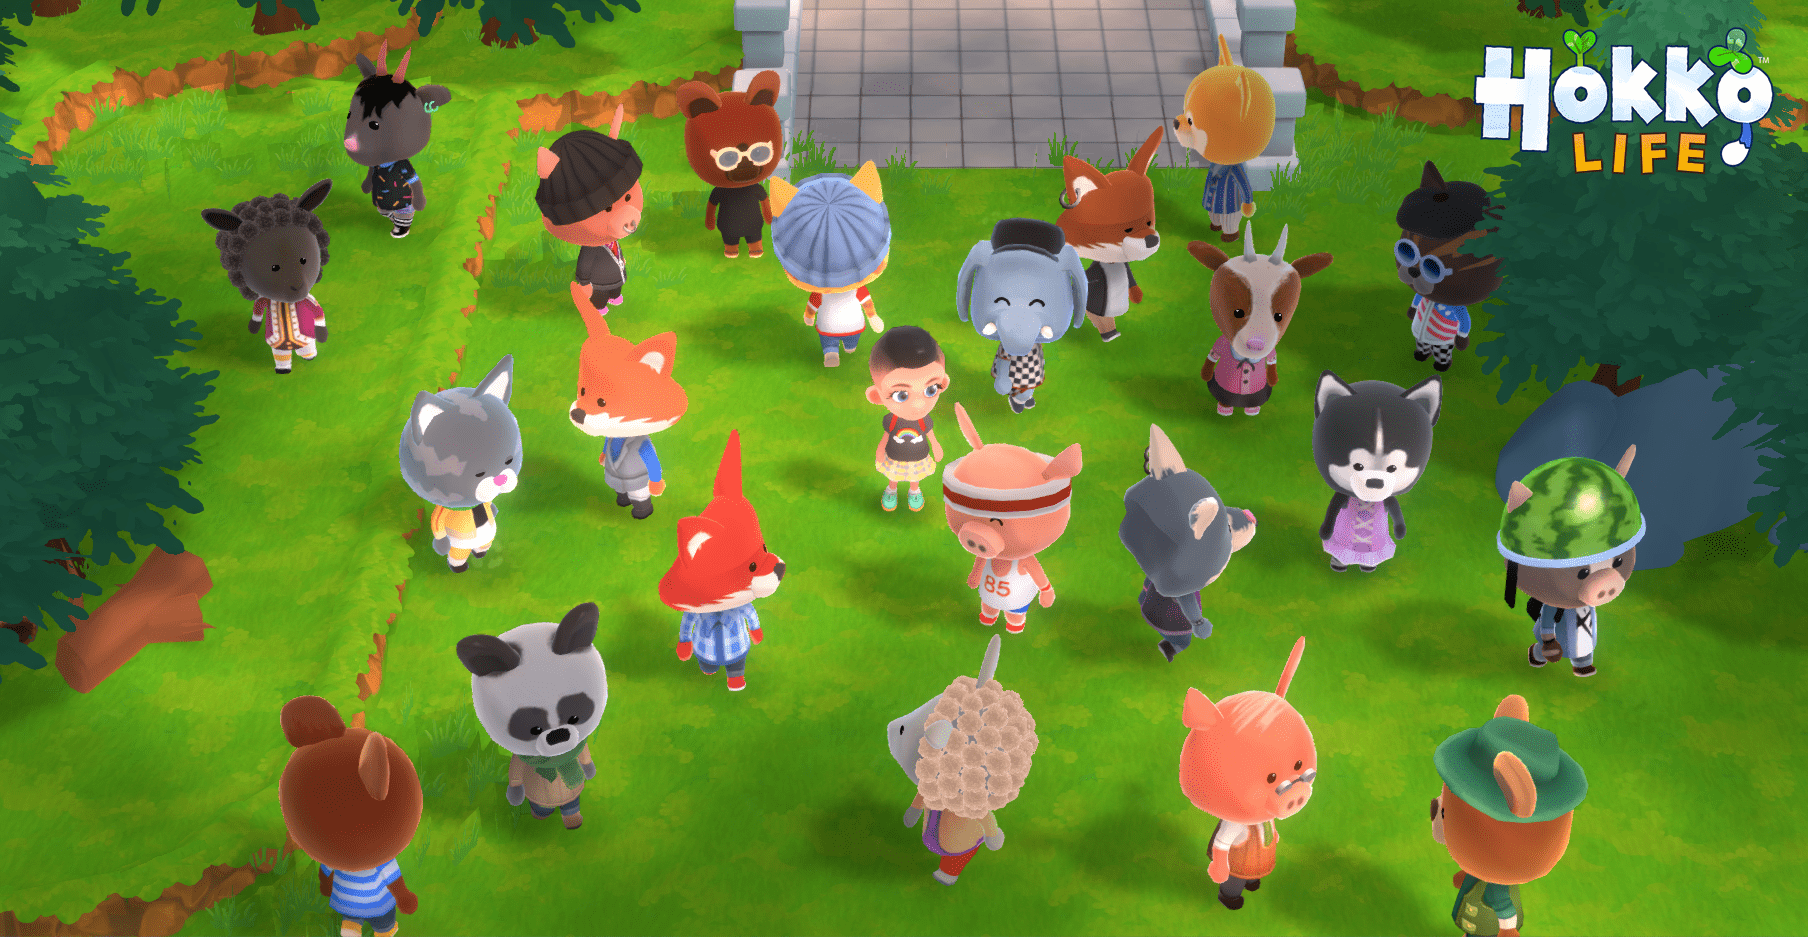 Hokko Life Is An Adorable Village Simulator Inspired By Animal Crossing, Get Off The Train And Enter A Whole New World Of Villaging Adventure